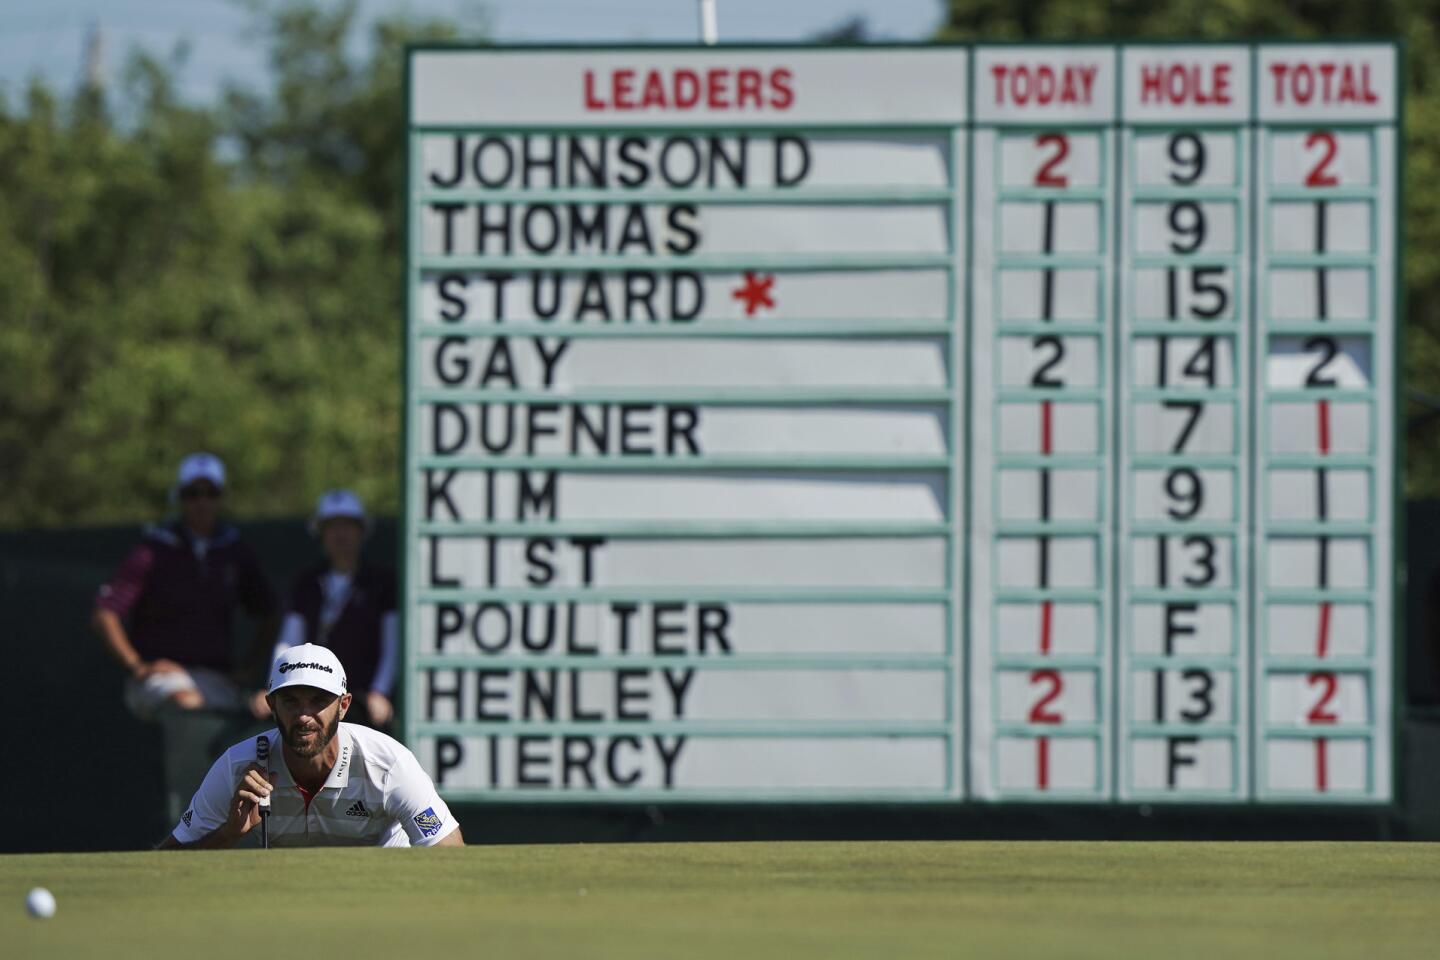 It's a crowded U.S. Open leaderboard, with big names and some not so